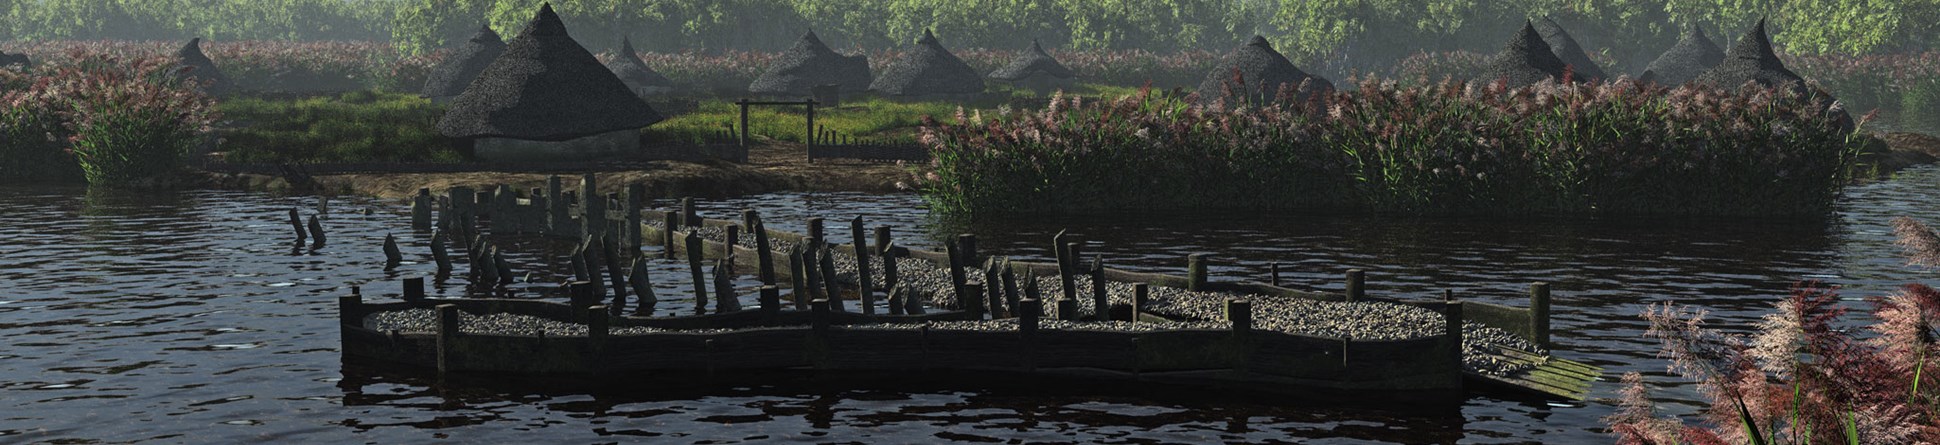 Reconstruction of a prehistoric lake village with roundhouses and woodland in the background; in the foreground is a timber jetty structure.